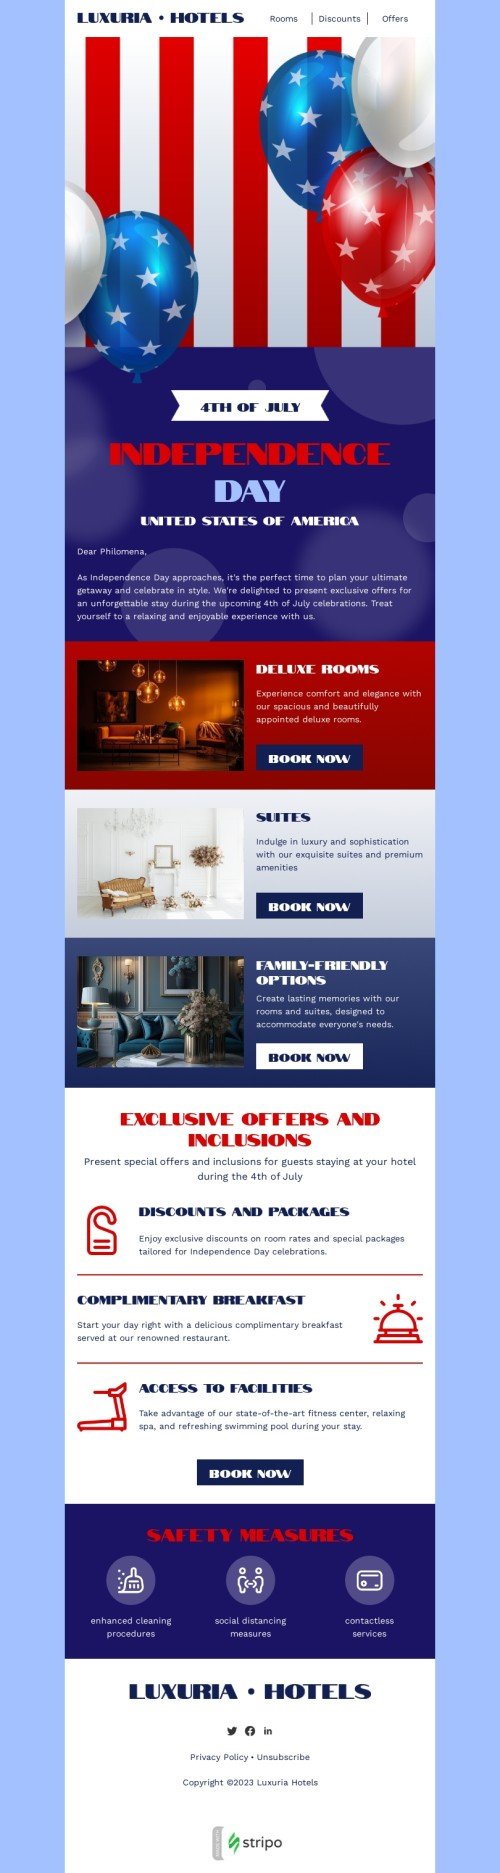 Independence Day email template "Independence Day approaches" for hotels industry desktop view